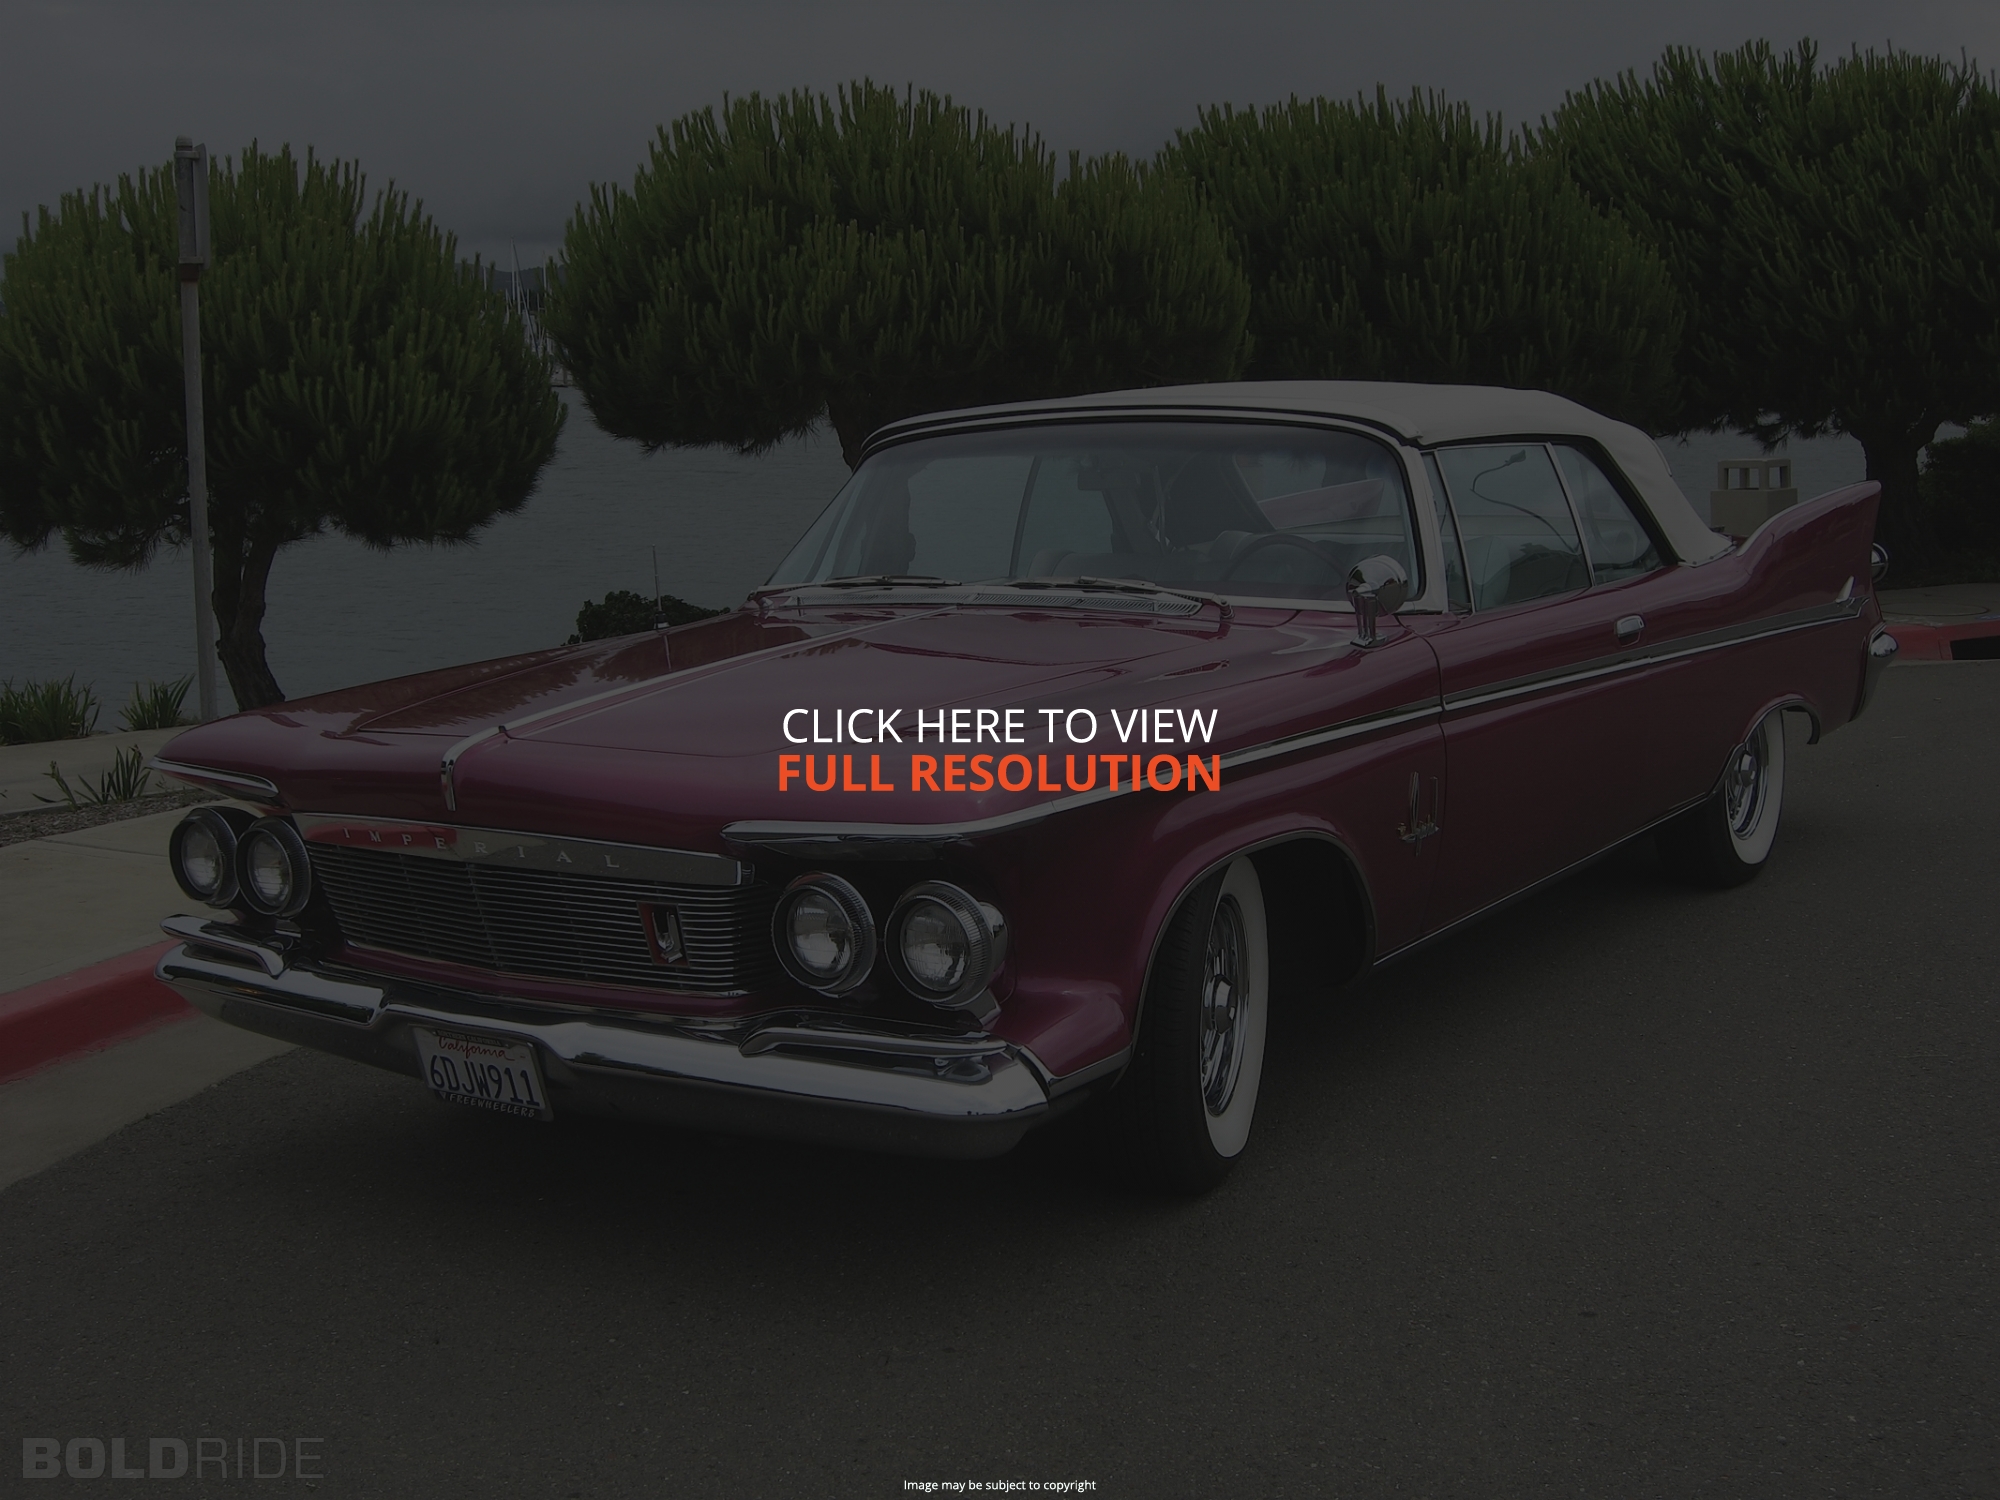 1961 Chrysler Imperial Crown Convertible Boldride.com - Pictures ...